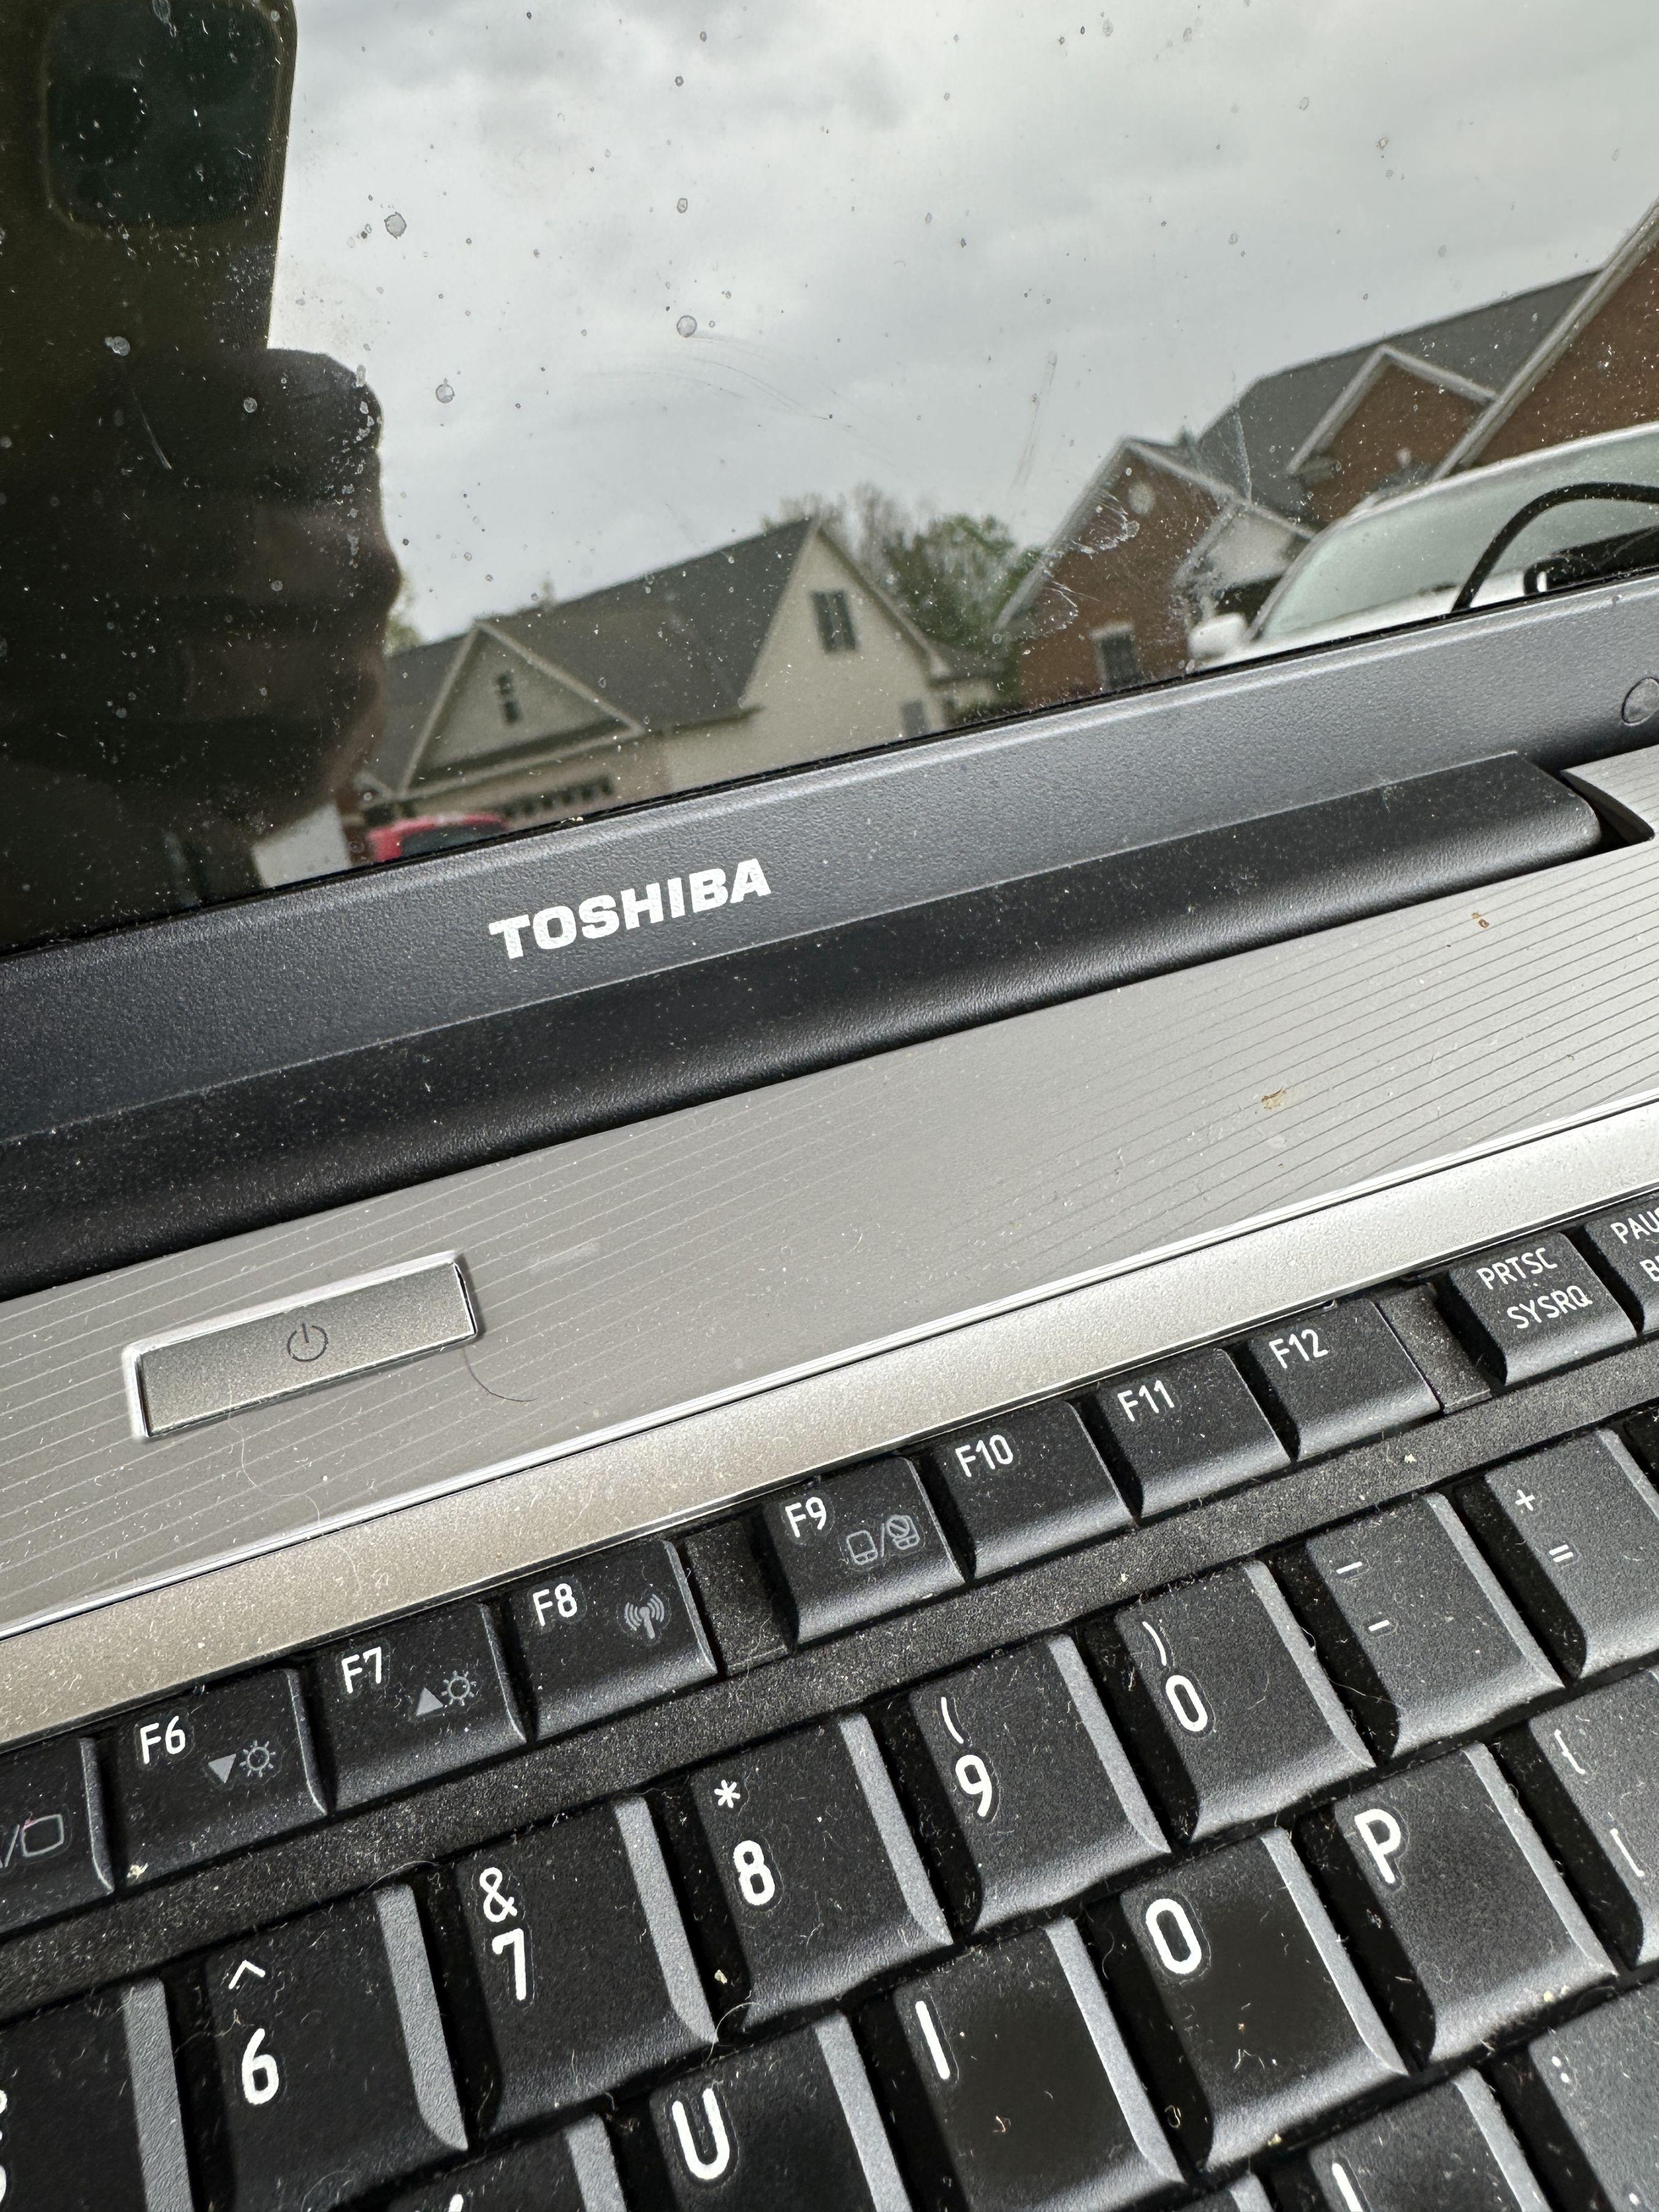 TOSHIBA Satellite L505-ES5015 Laptop with Carry Case